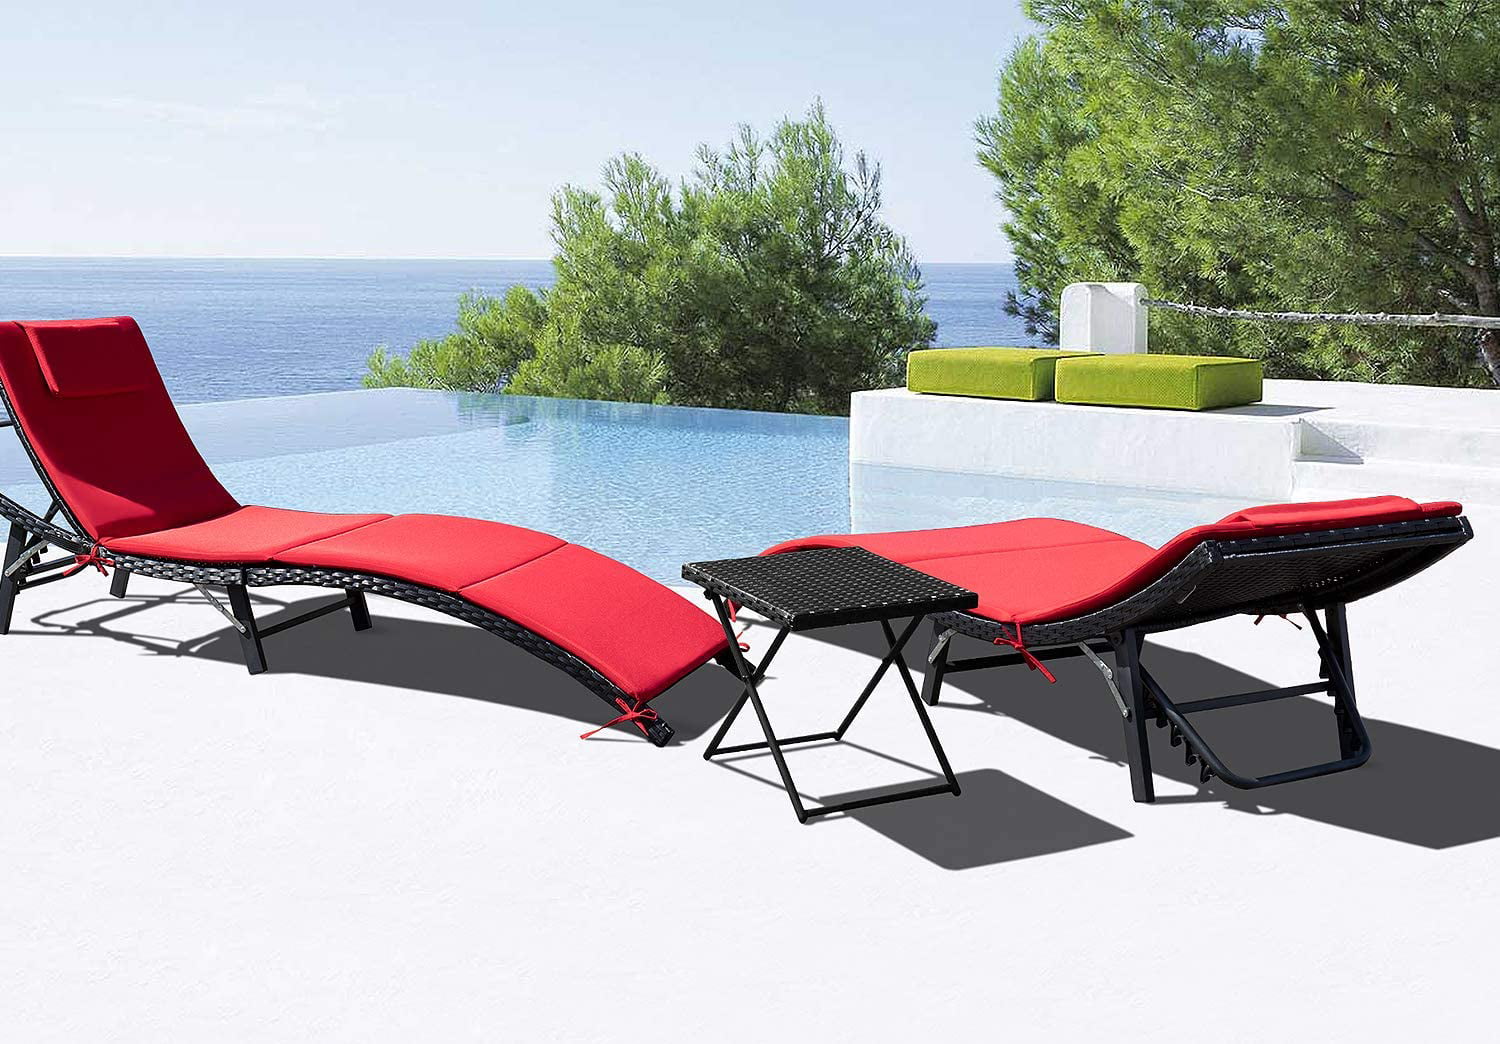 Flamaker 3 Pieces Patio Chaise Lounge with Cushions Unadjustable Modern Outdoor Furniture Set PE Wicker Rattan Backrest Lounger Chair Patio Folding Chaise Lounge with Folding Table 3 Pieces 